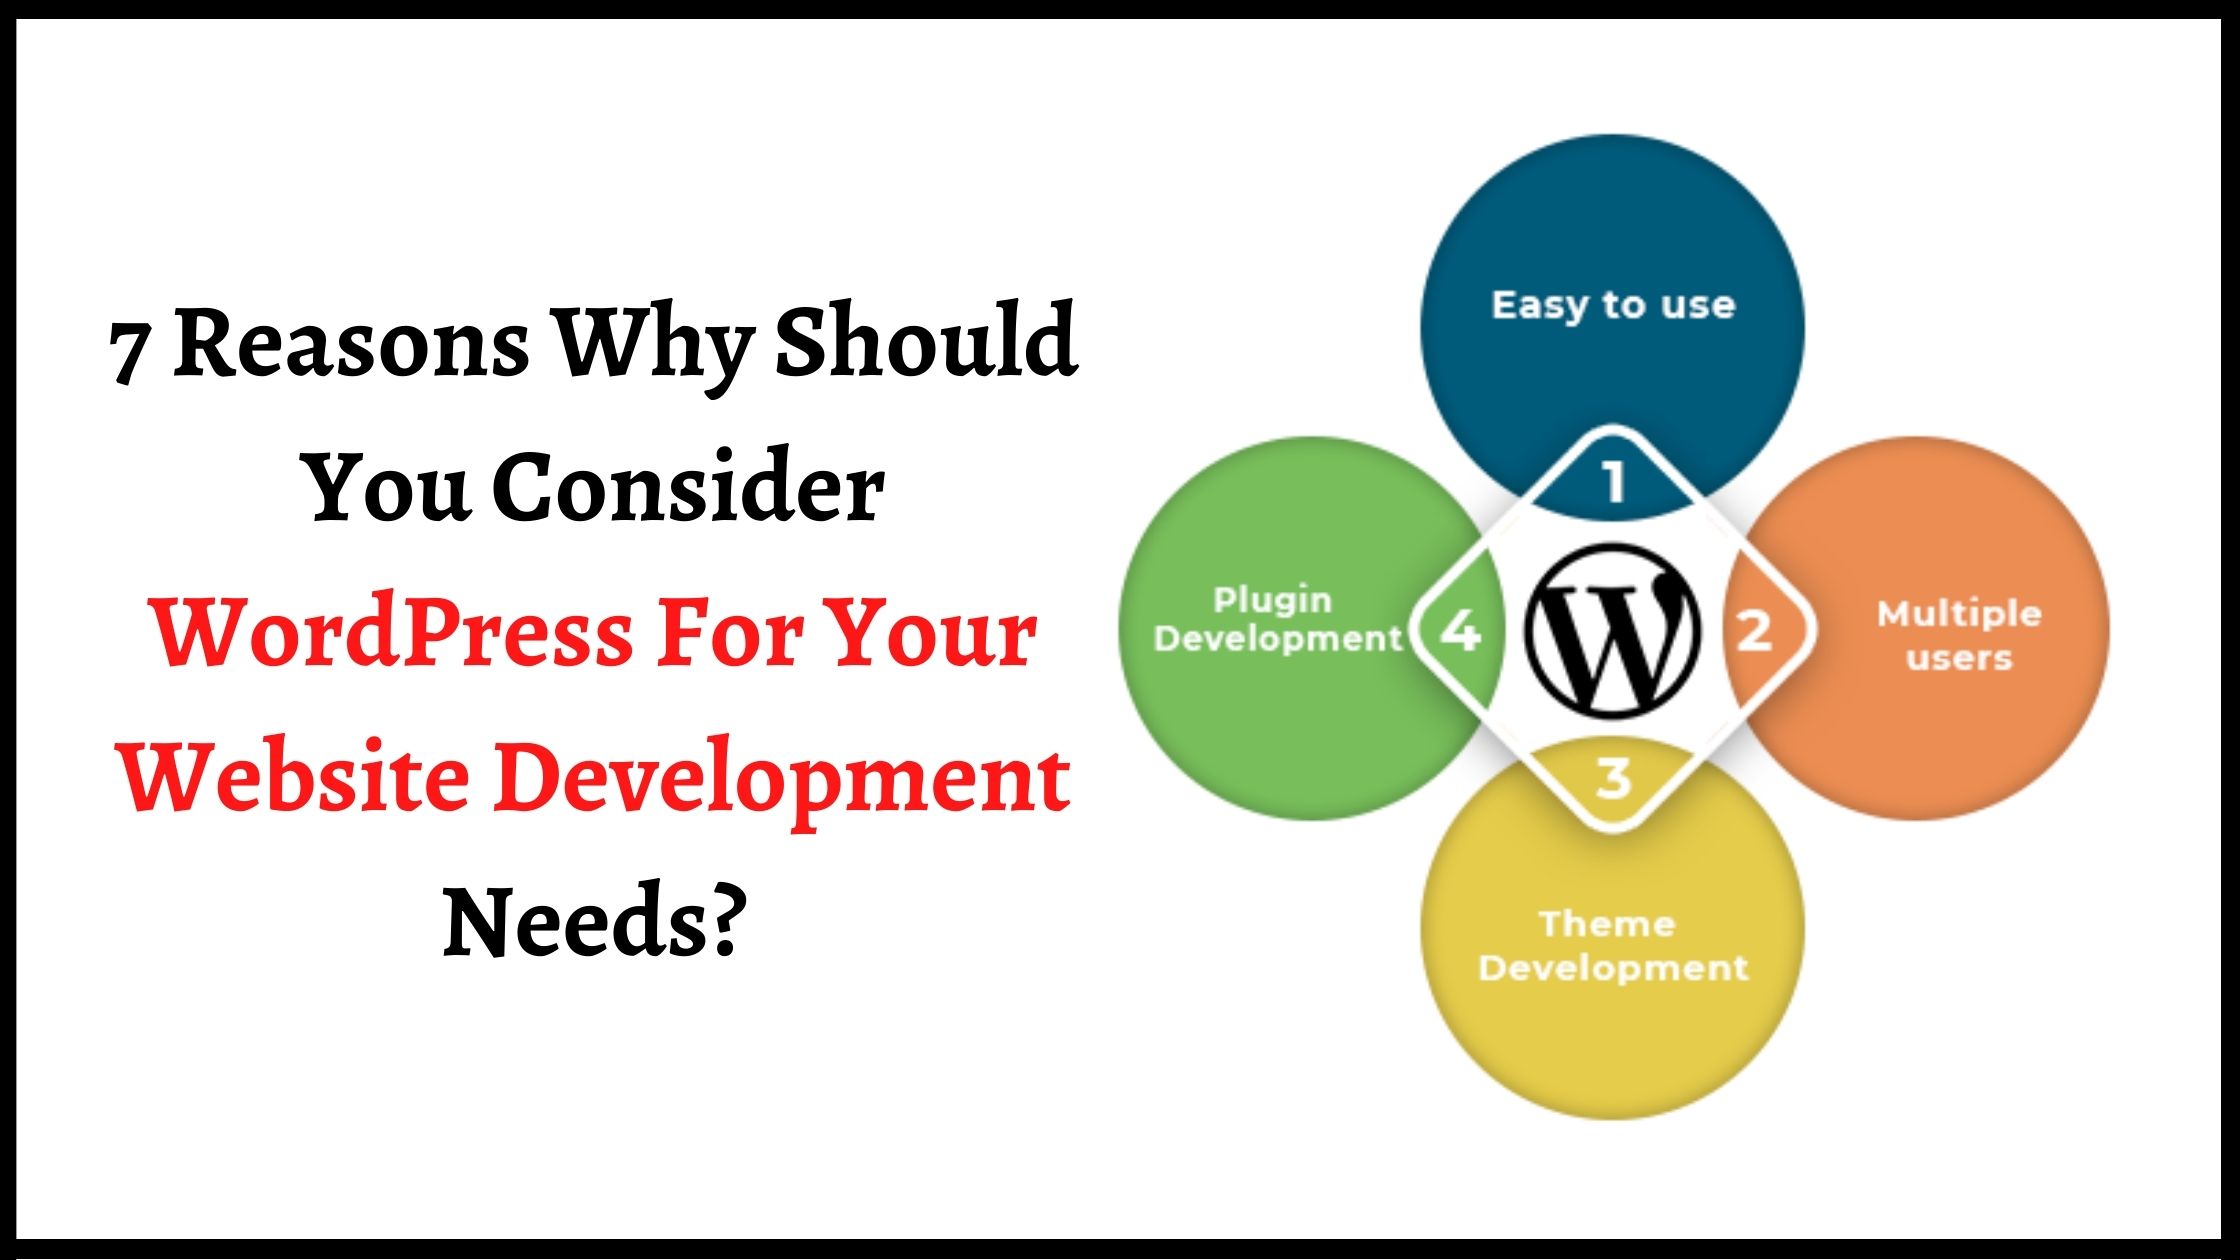 7 Reasons Why You Should Consider WordPress For Your Website Development Needs